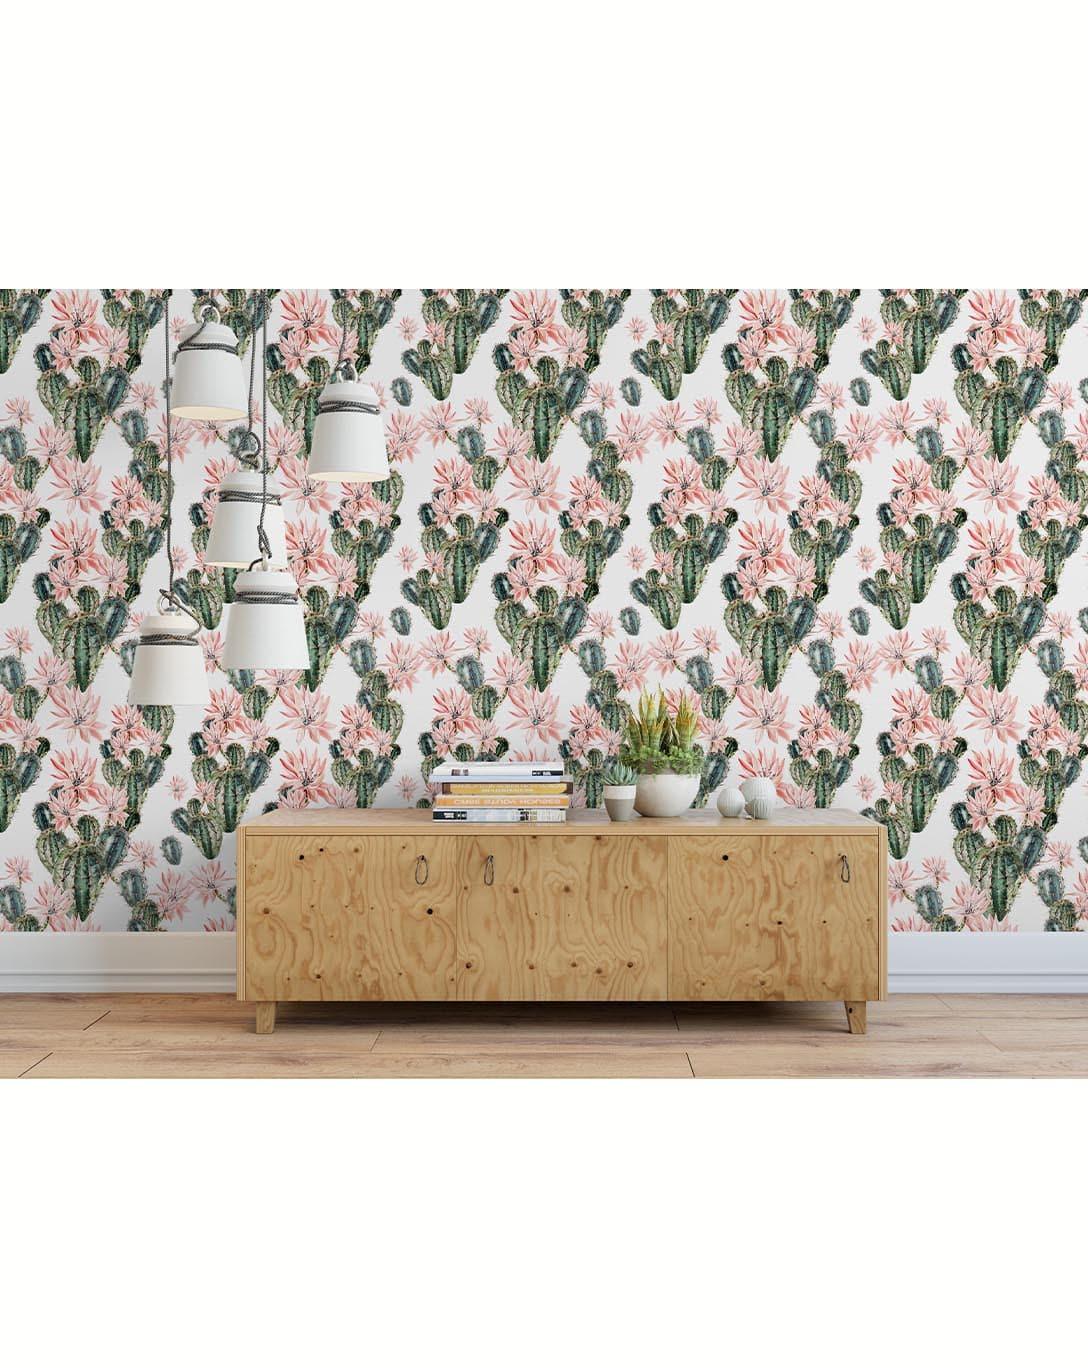 Watercolor Floral Blooming Cactus Removable Wallpaper 